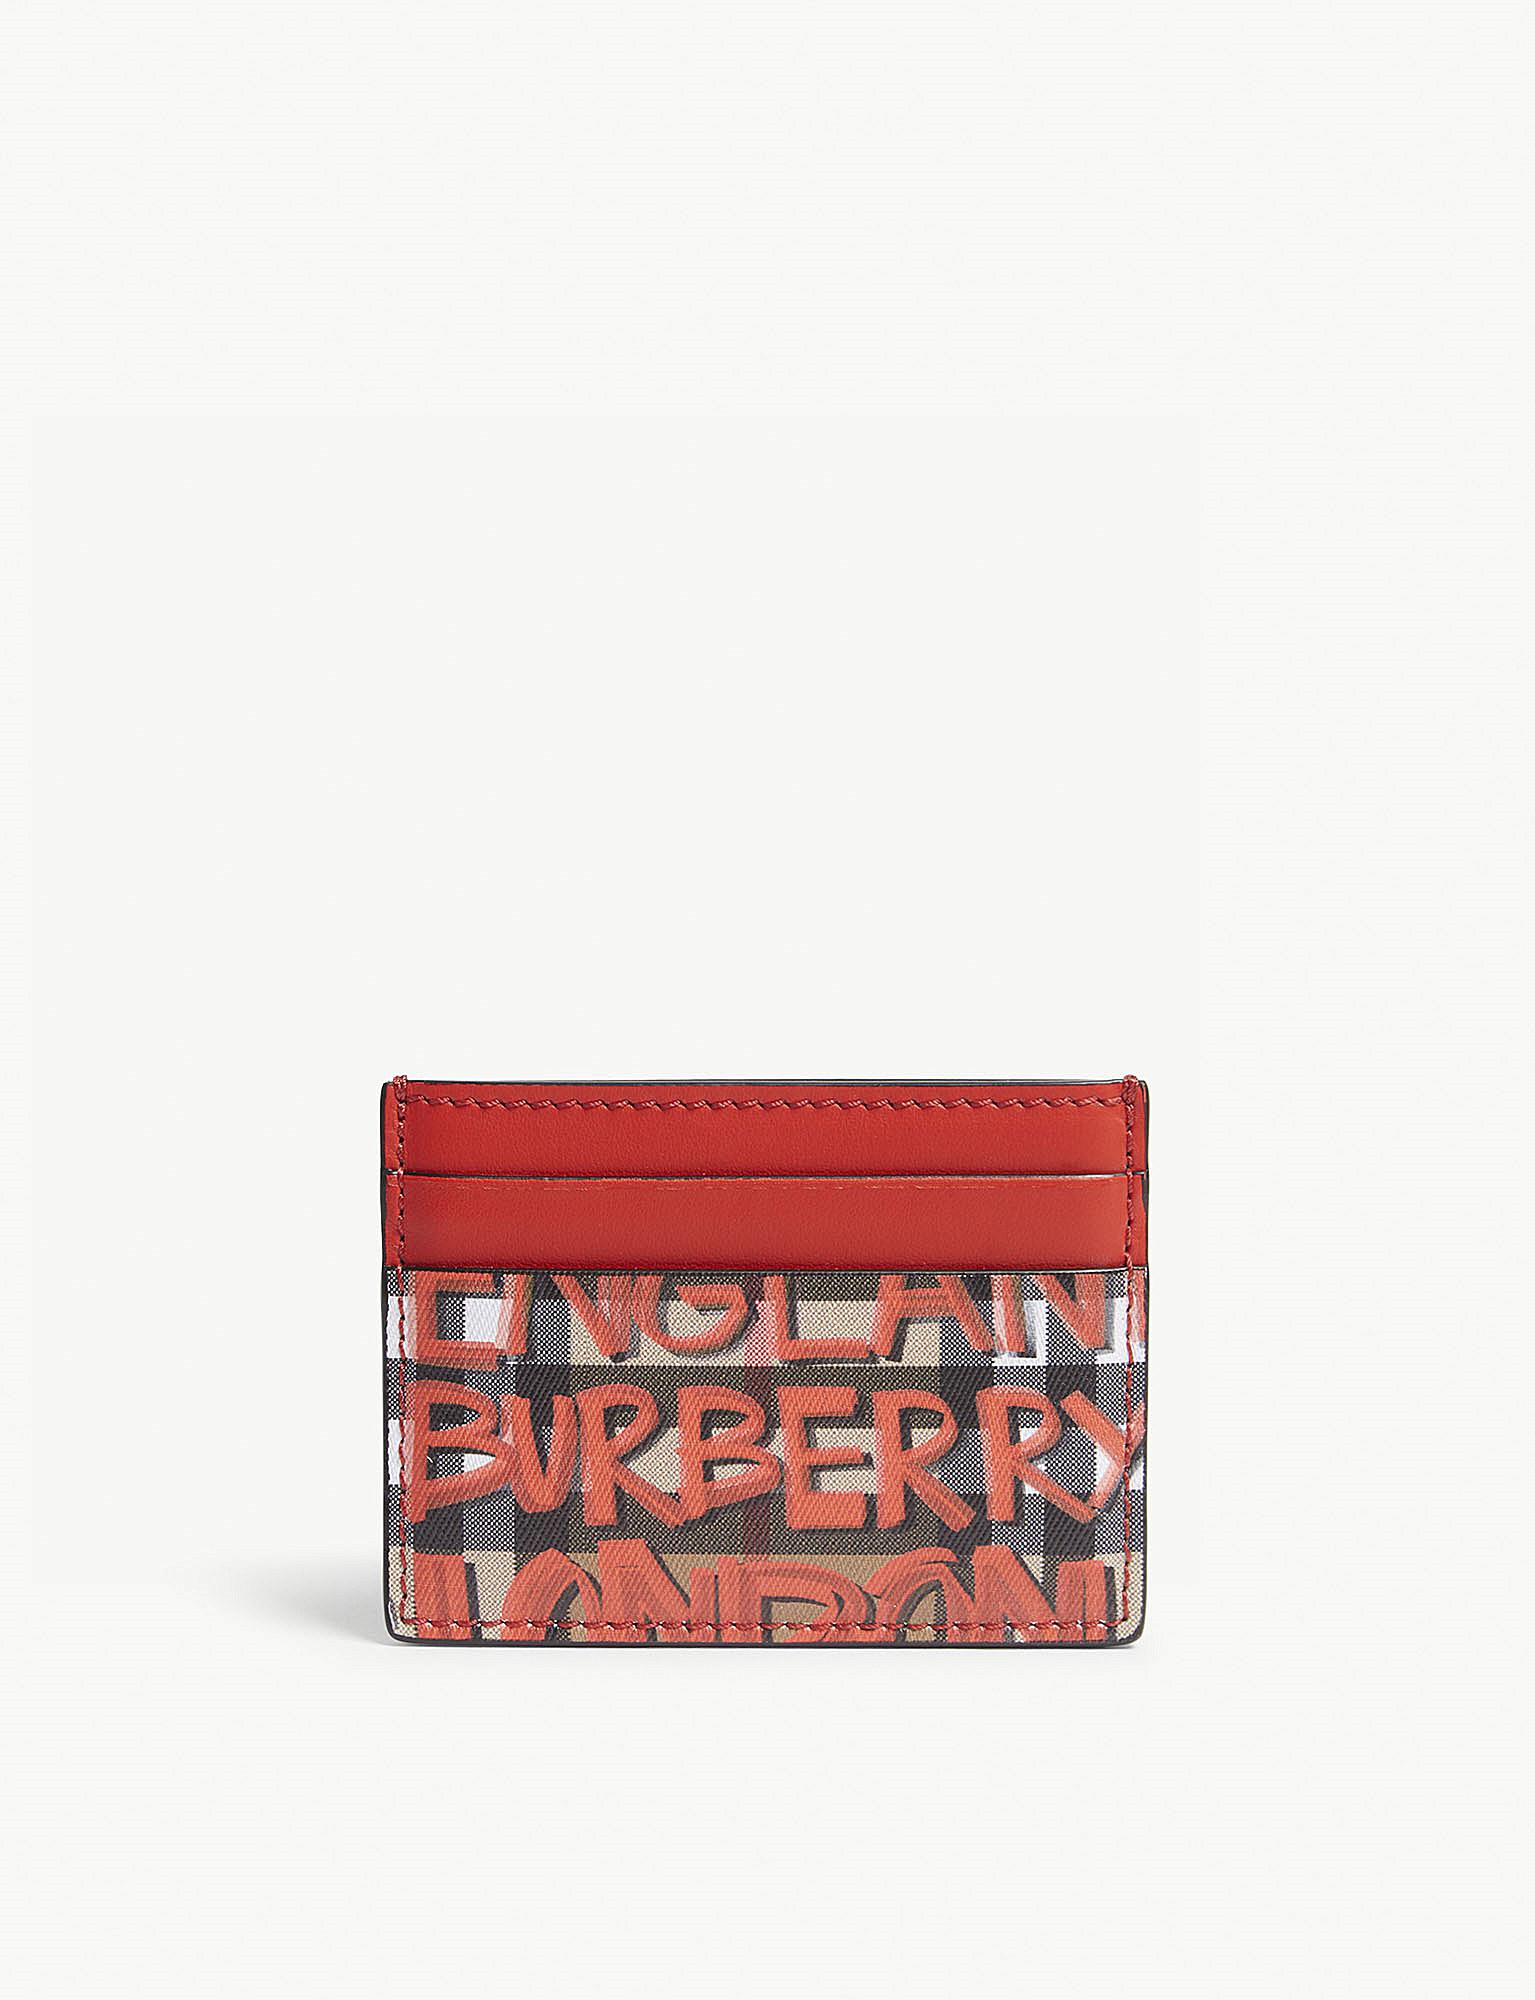 burberry card holder red